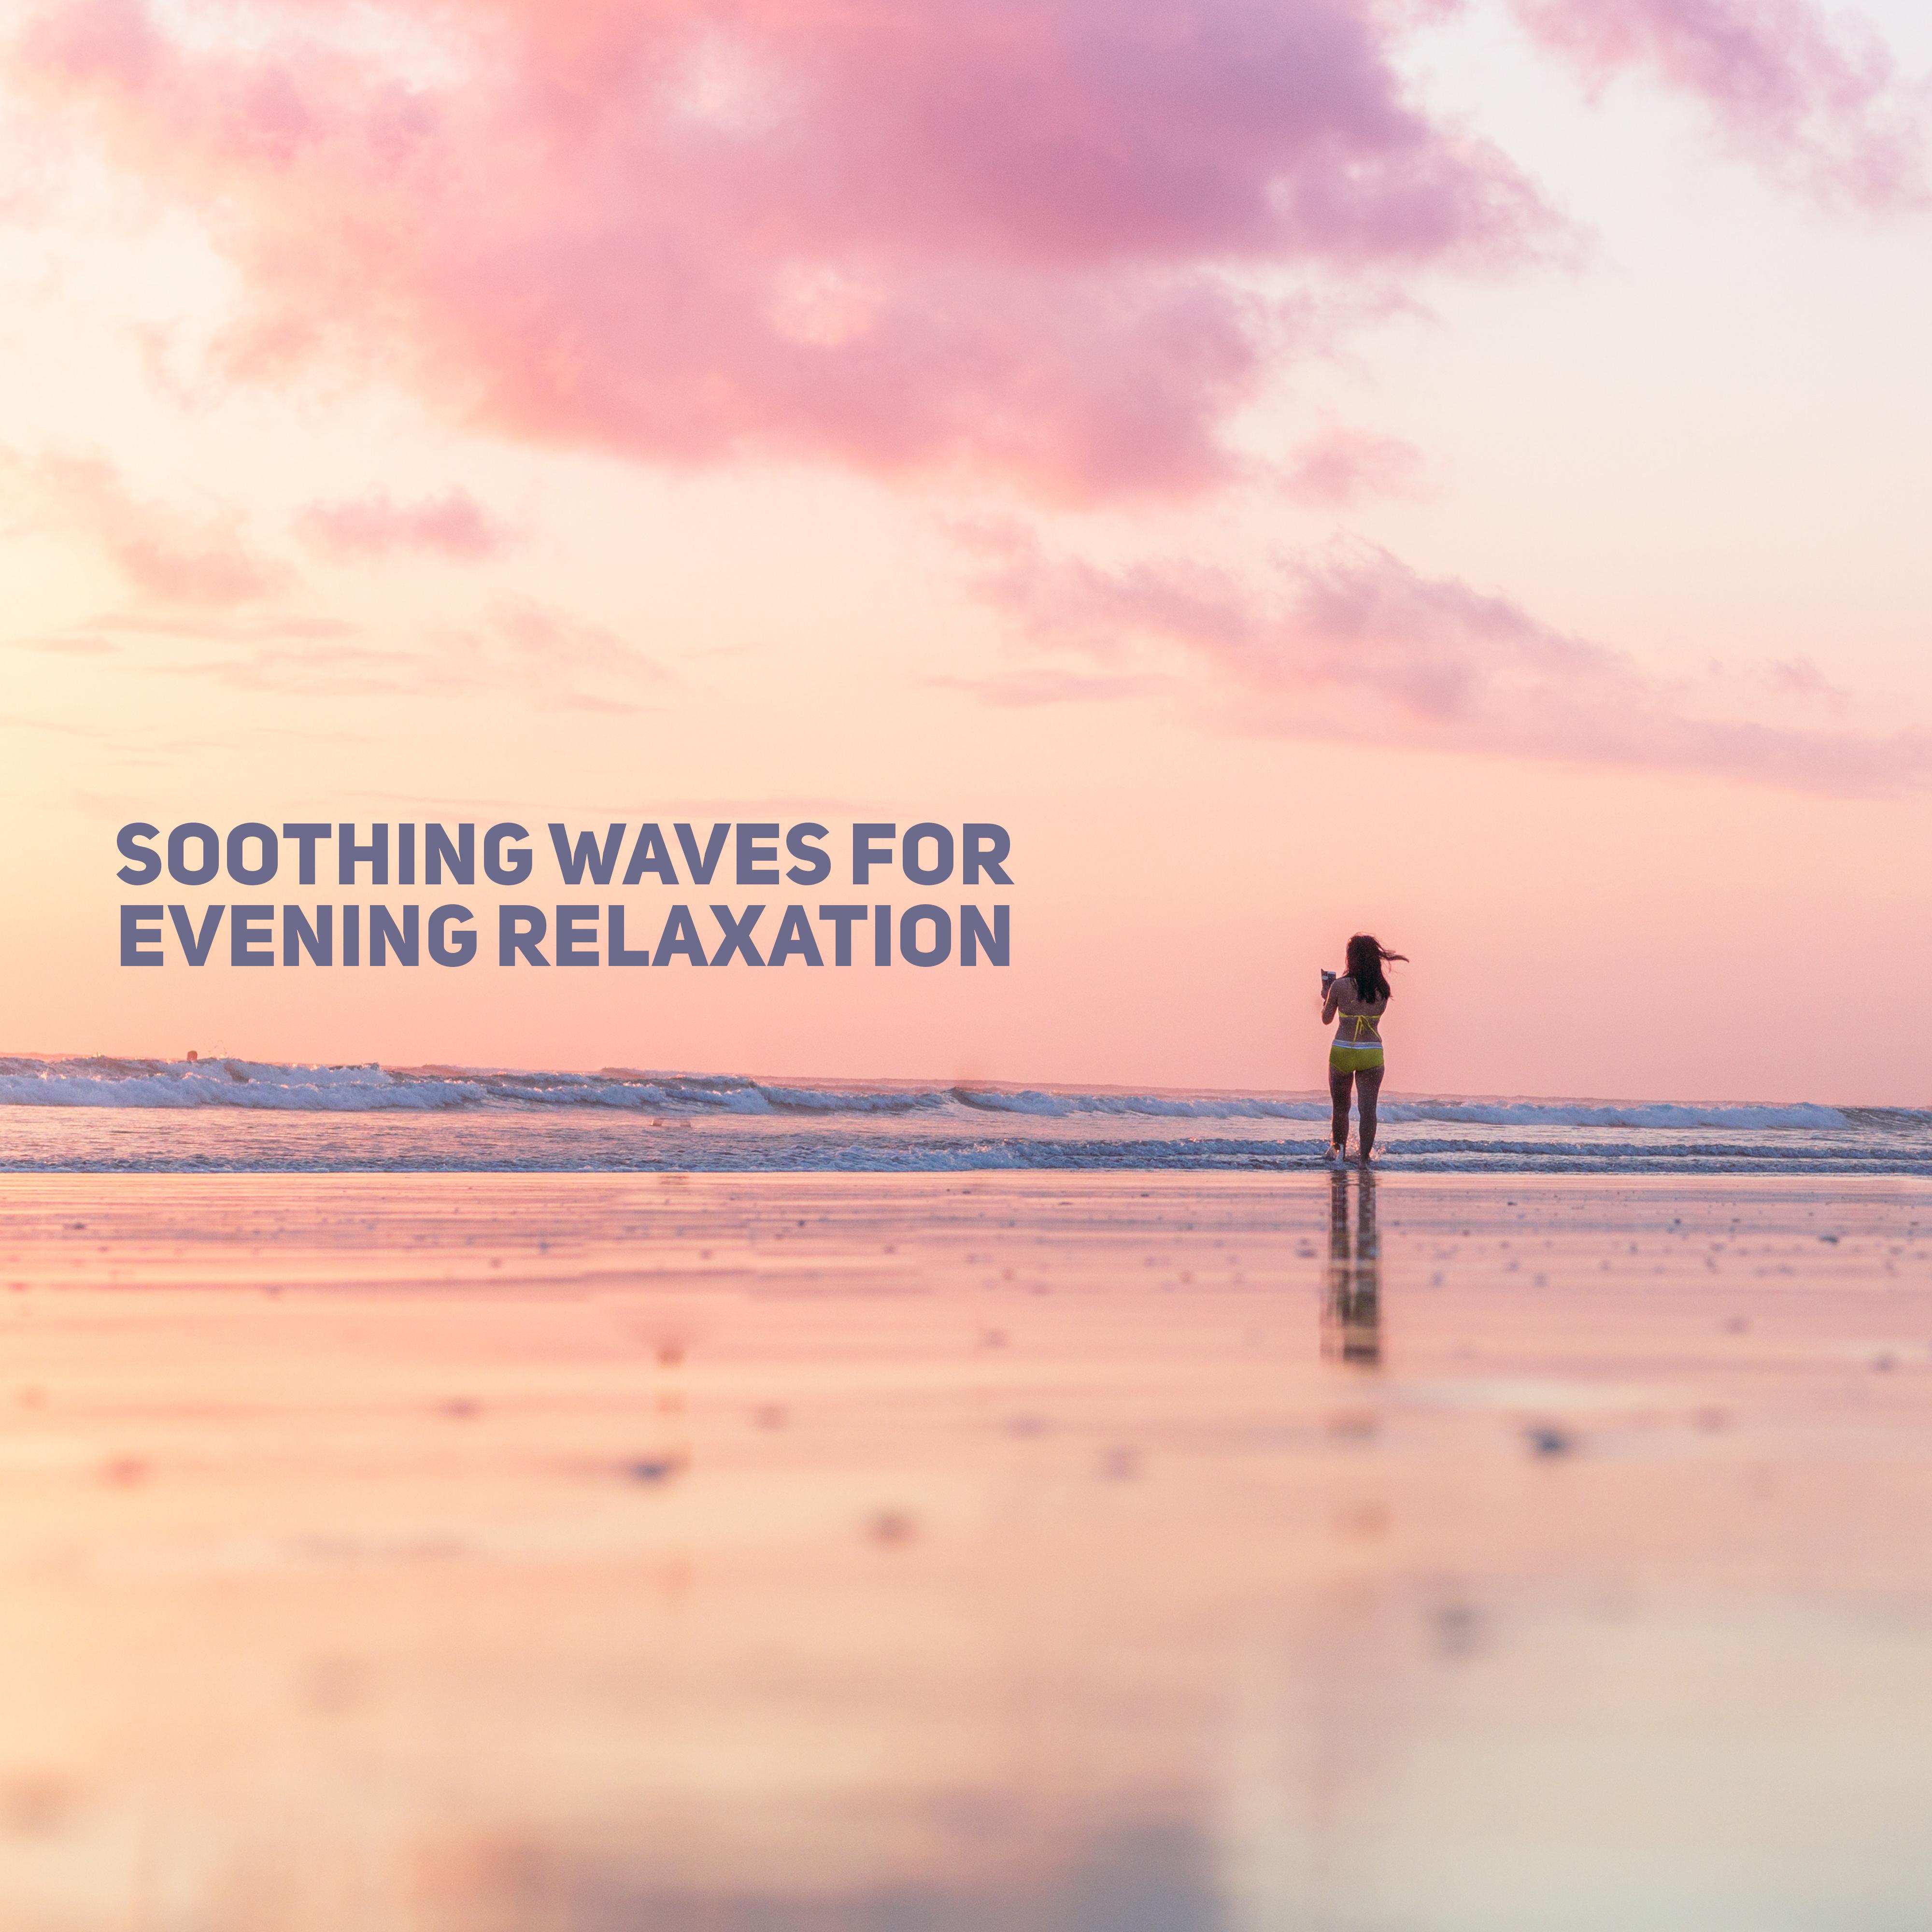 Soothing Waves for Evening Relaxation